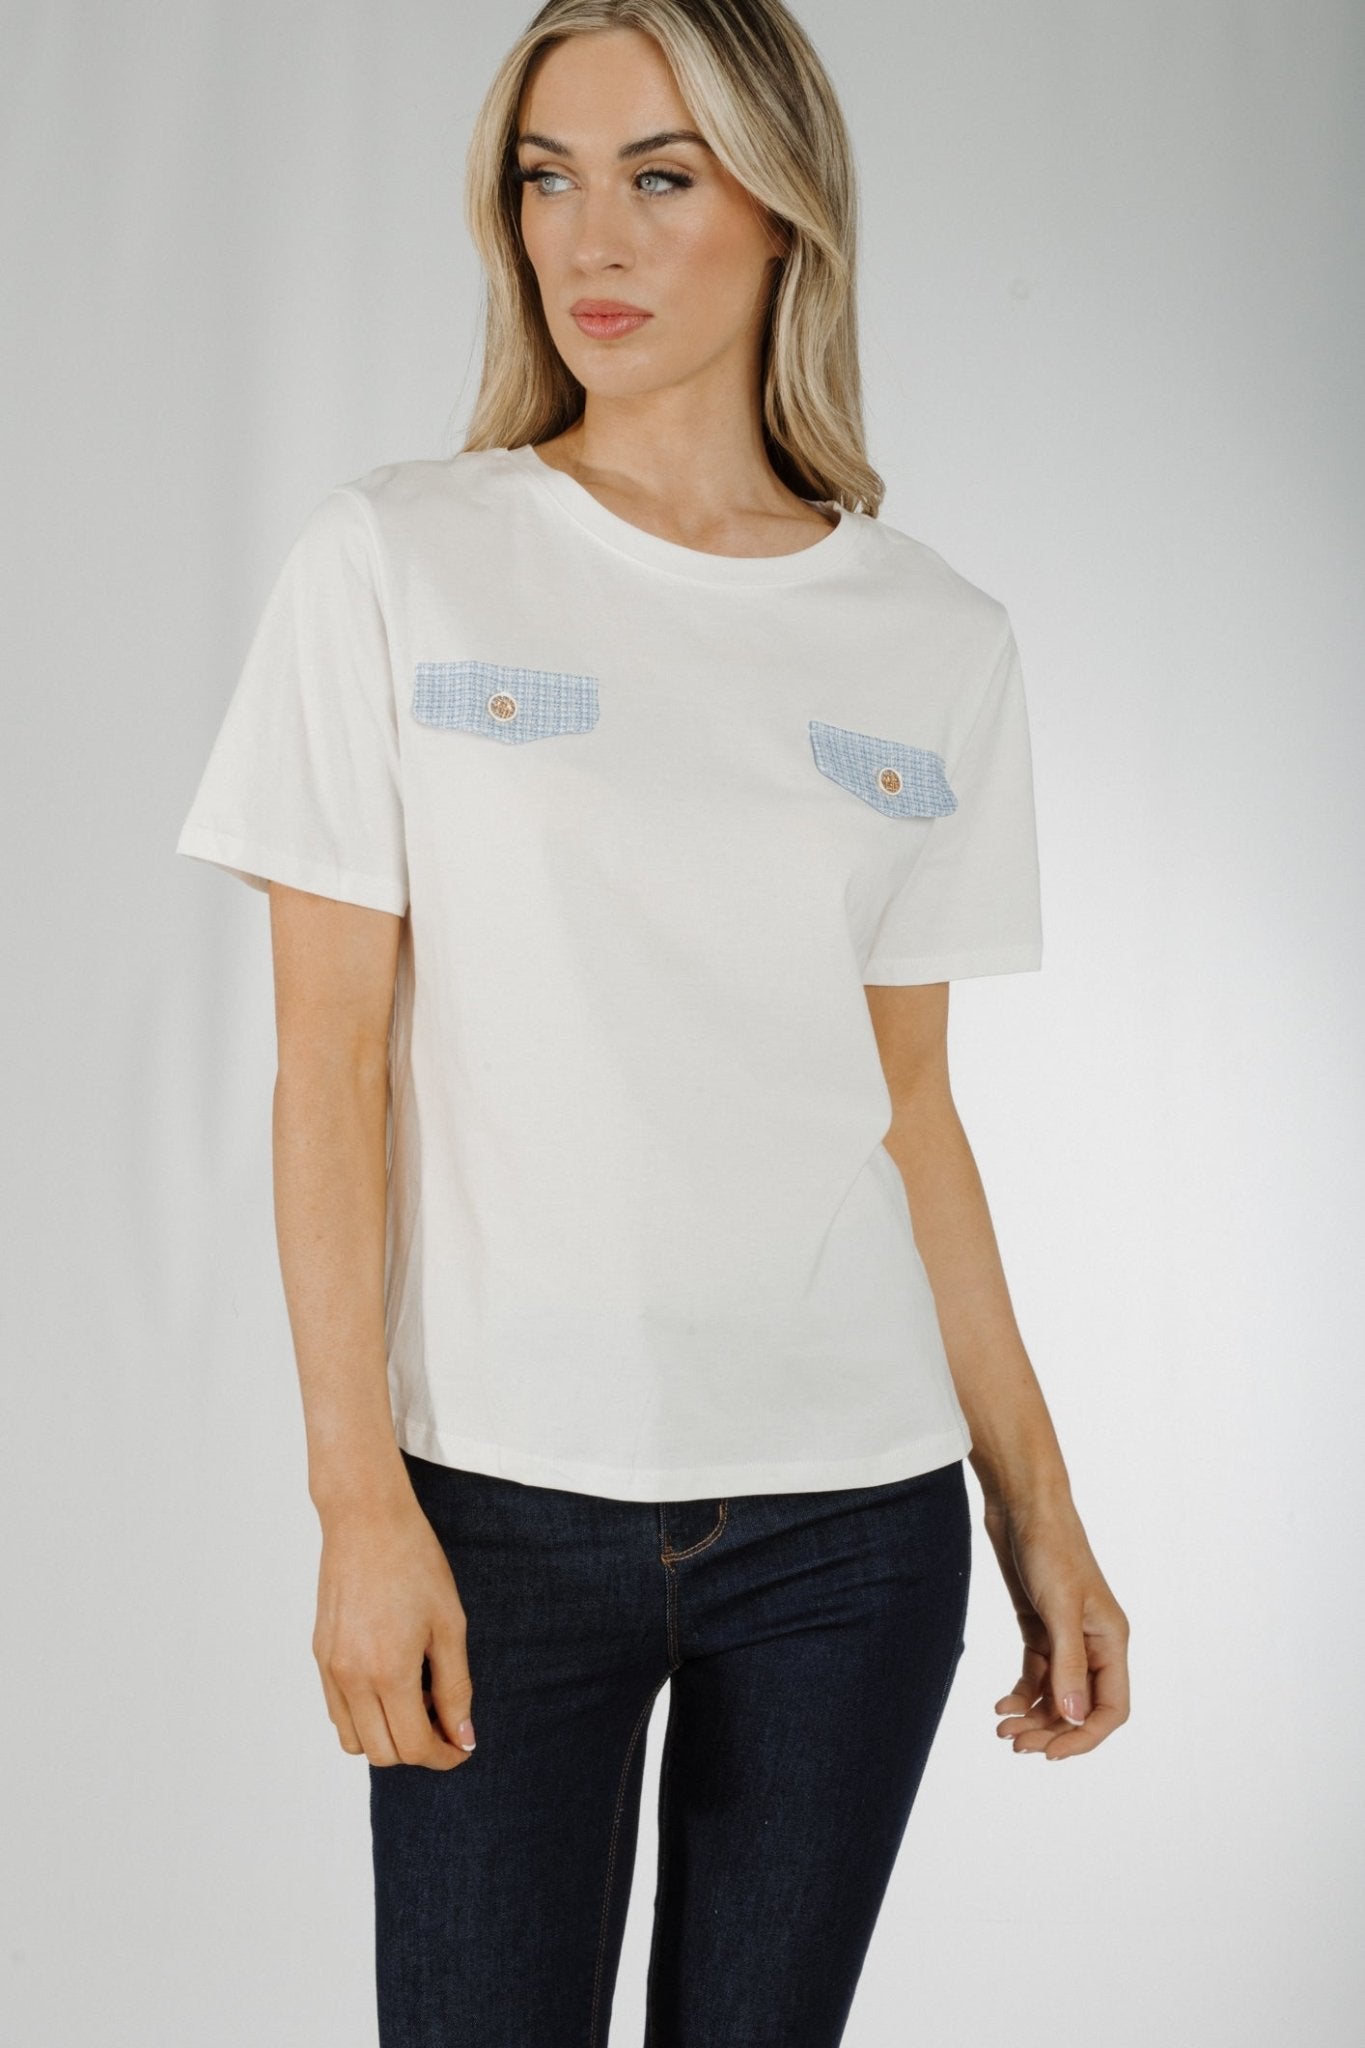 Holly Blue Pocket Detail T-Shirt In White - The Walk in Wardrobe